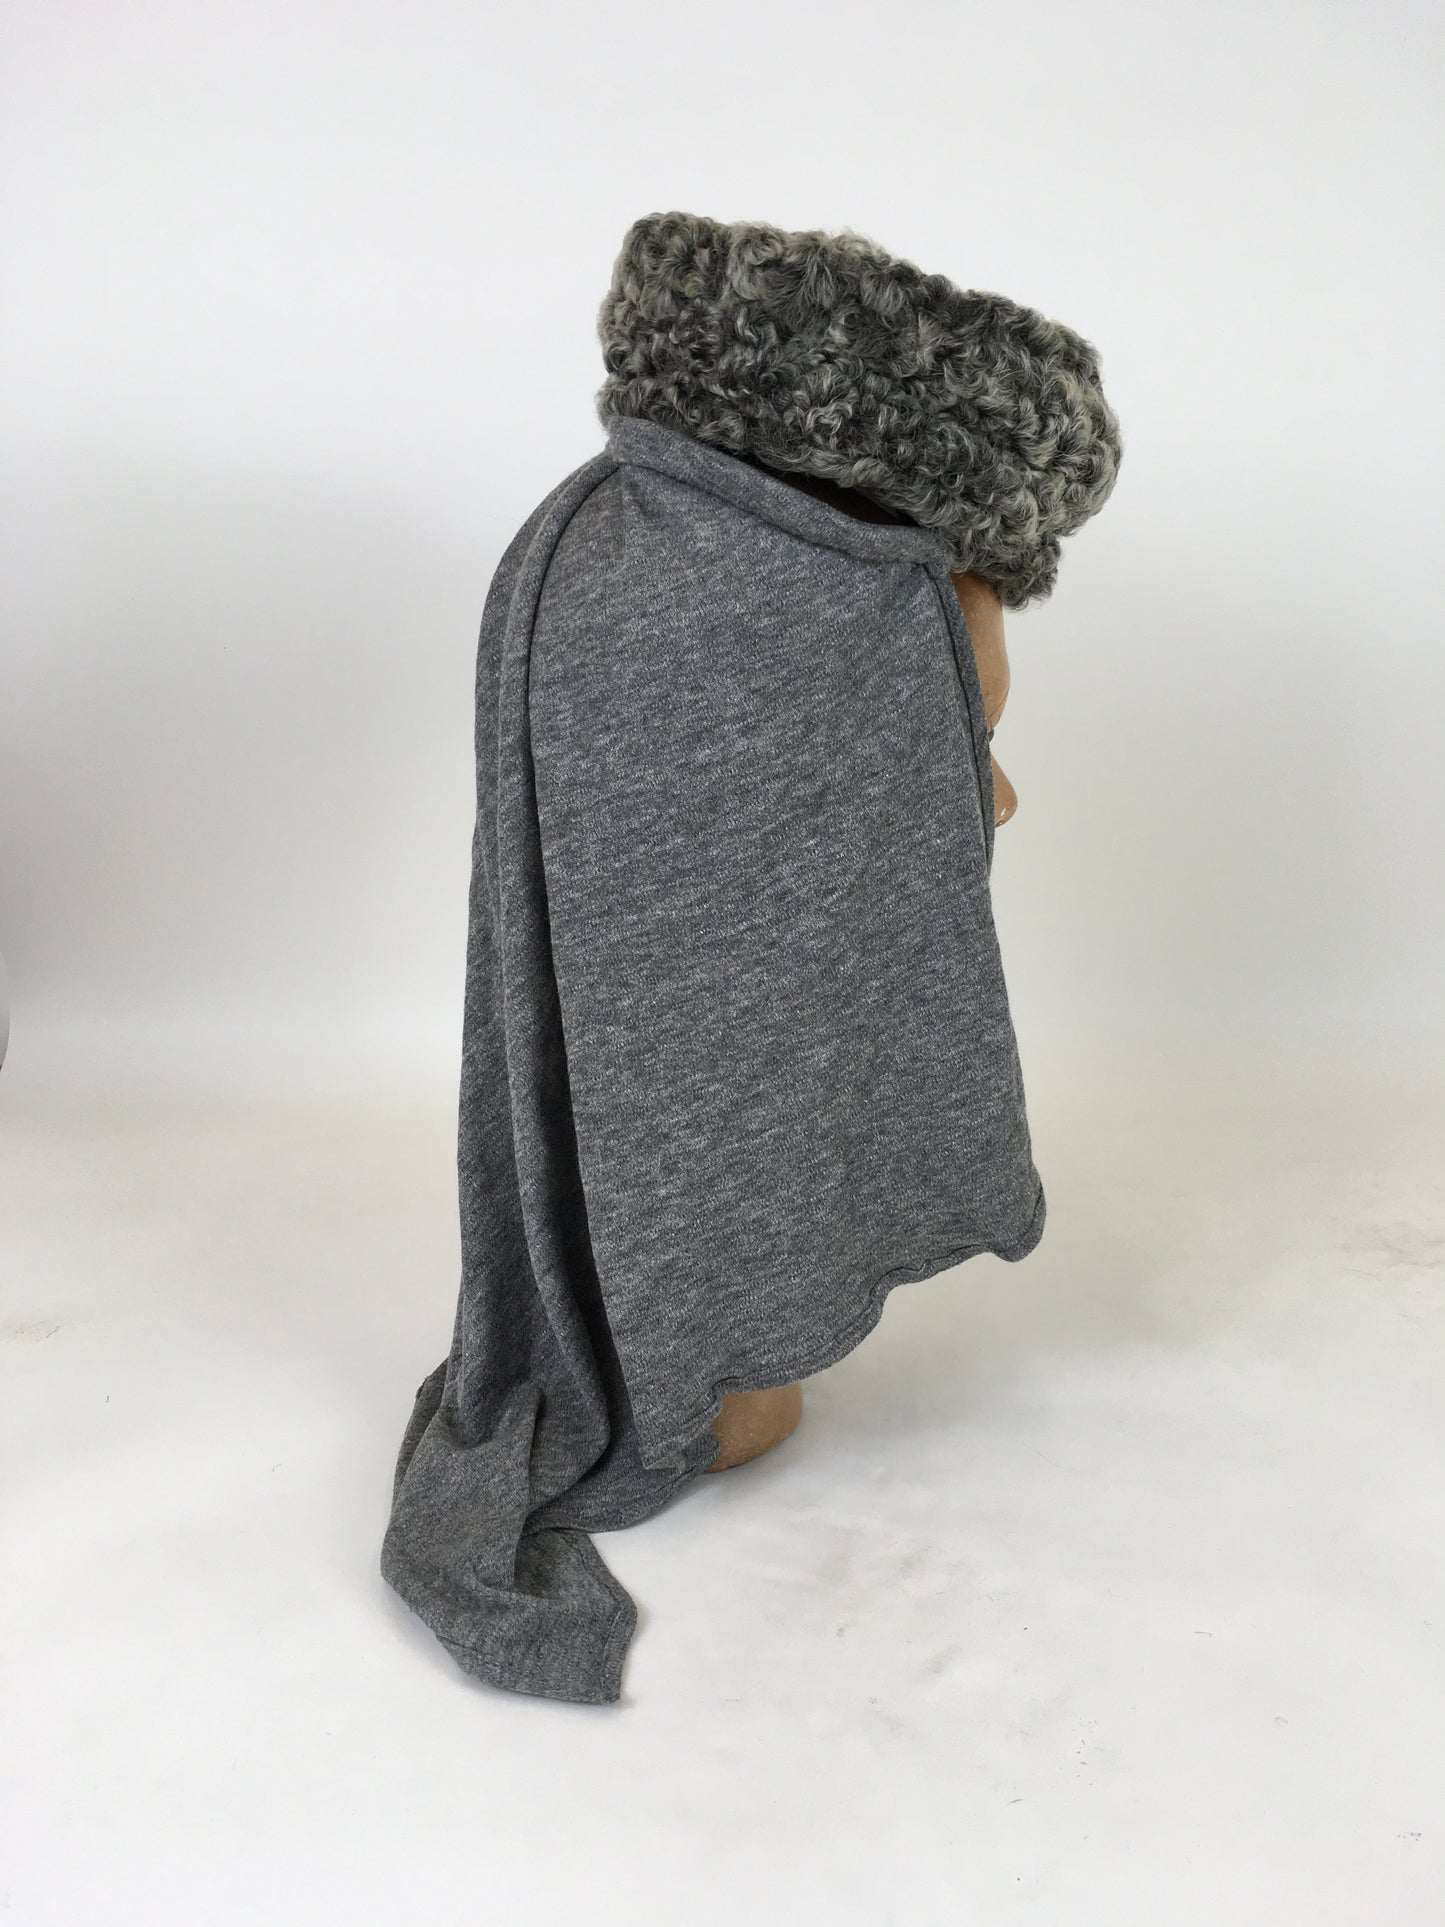 Original 1940's Sensational Astrakhan Wimple Style Hat - In Grey Marl with Detachable Scarf